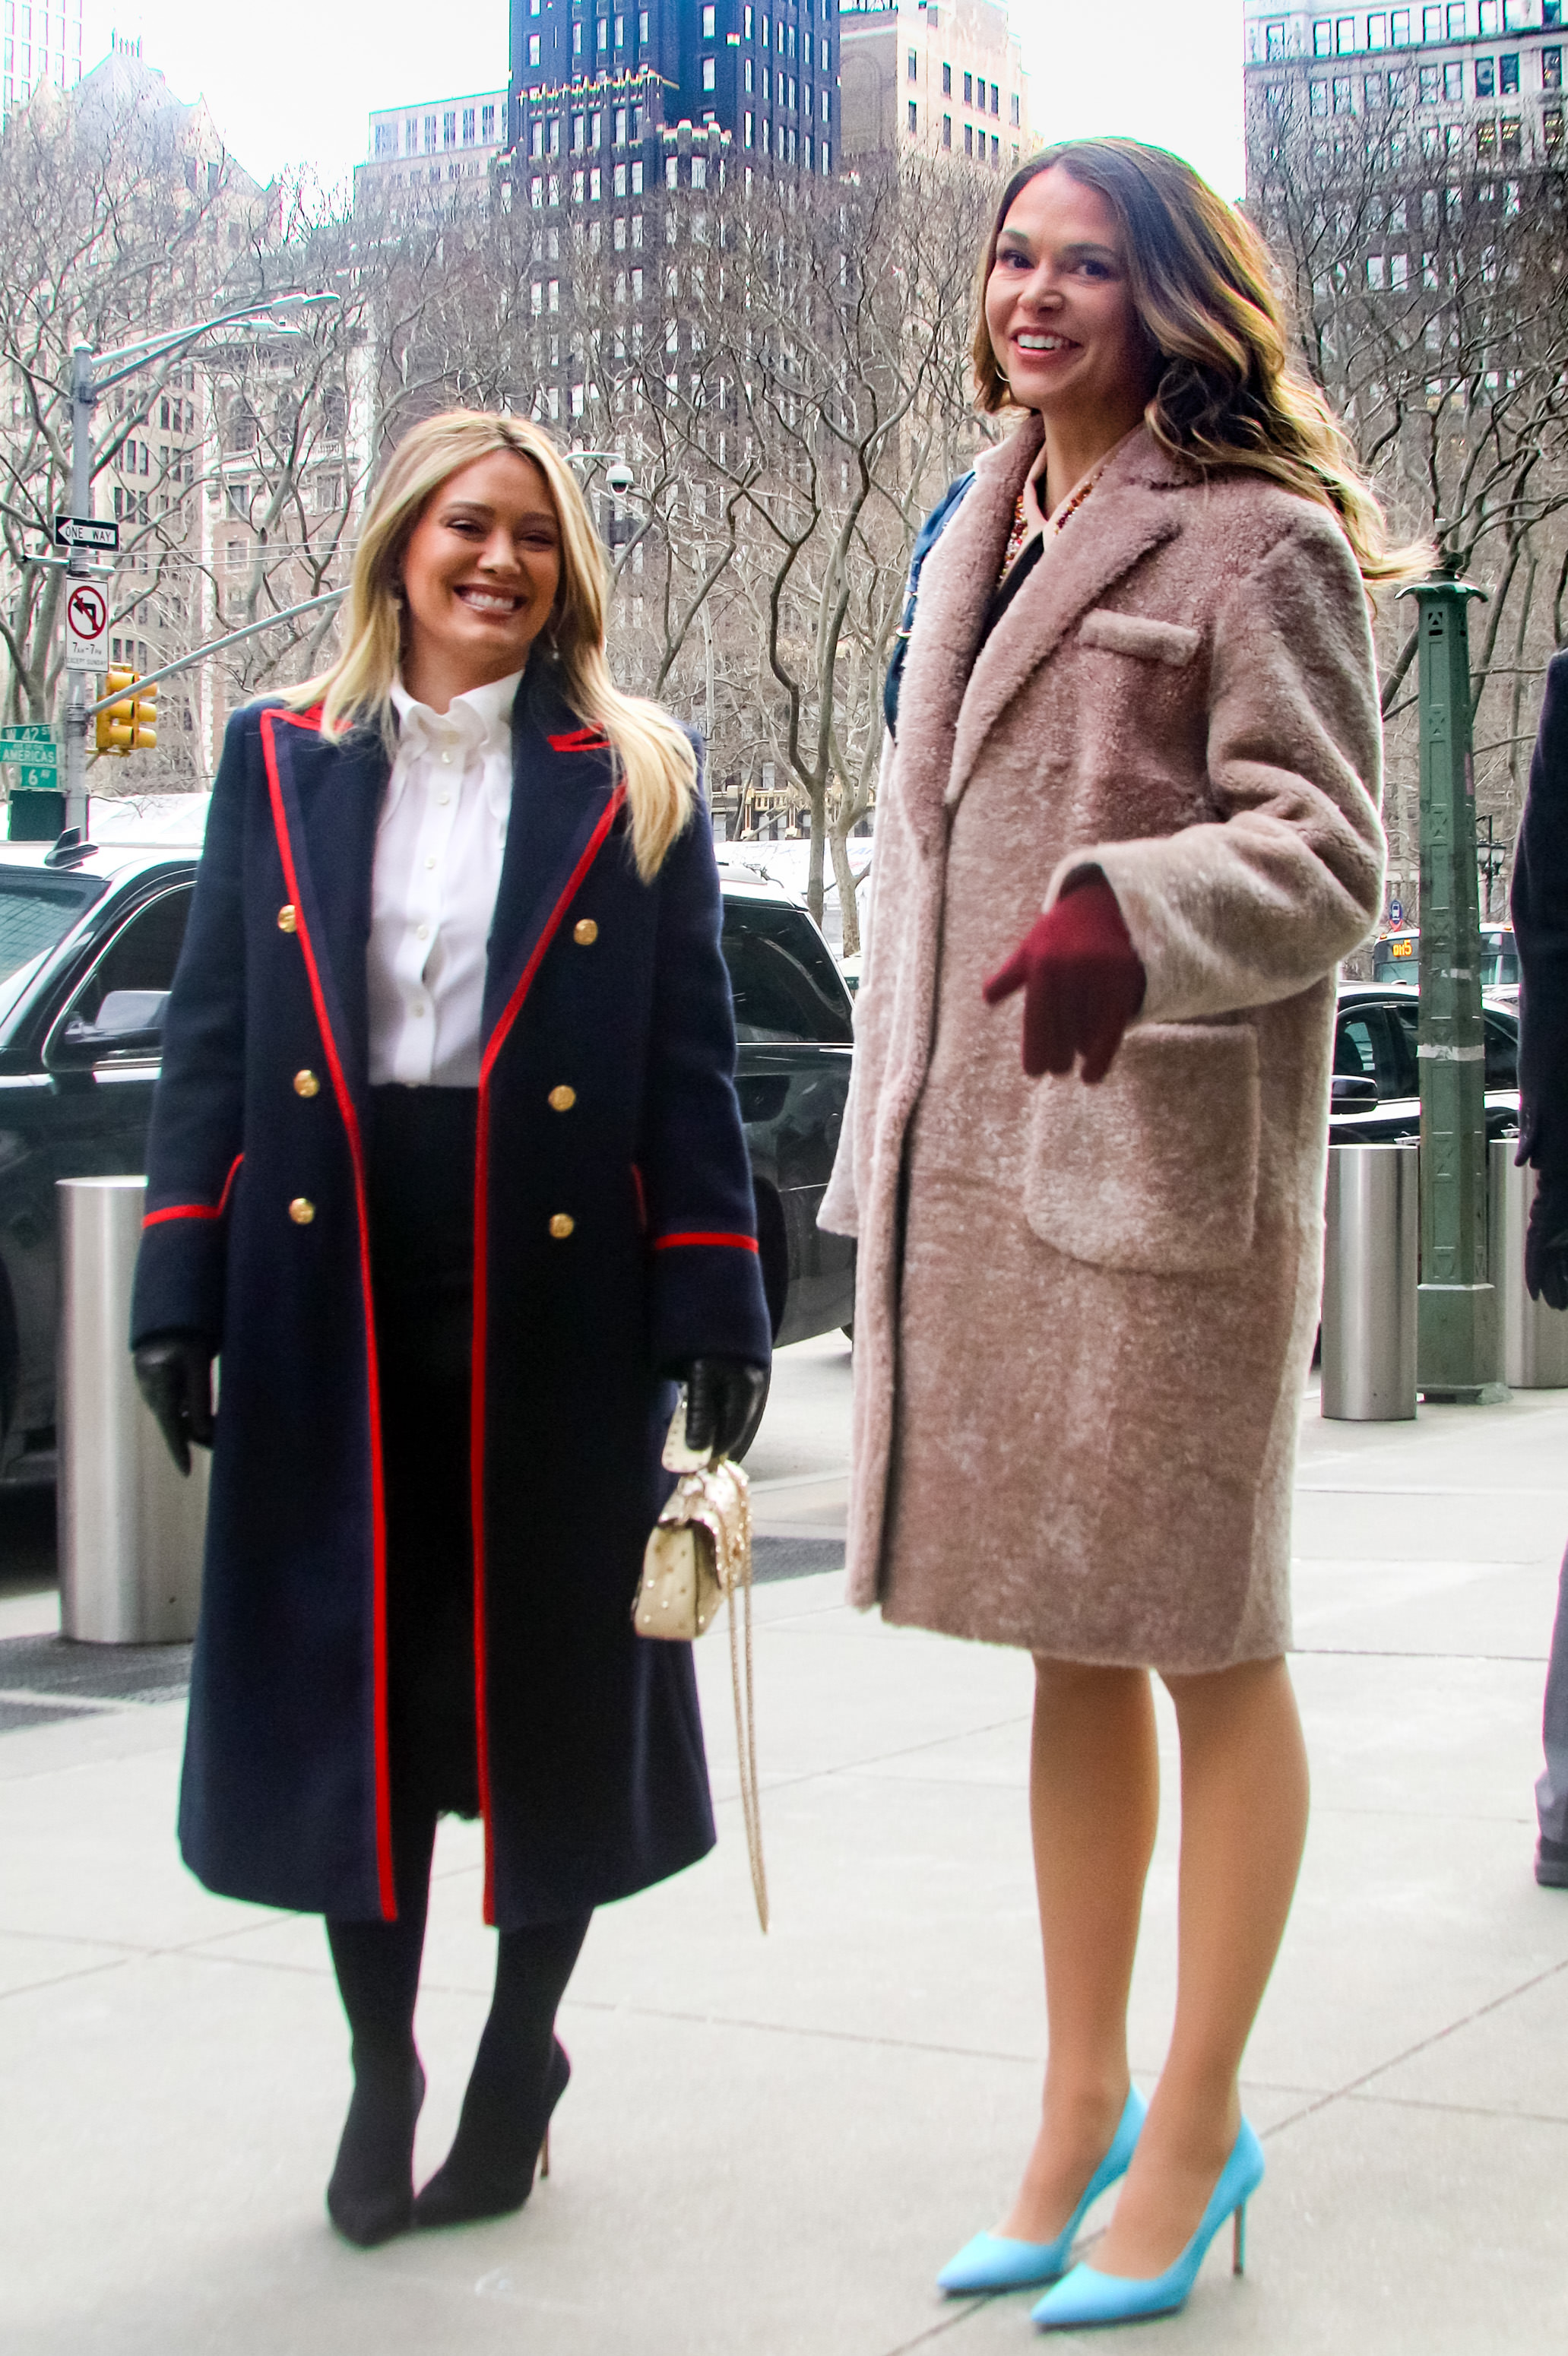 Hilary Duff and Sutton Foster filming 'Younger' on the streets of NYC back in 2019